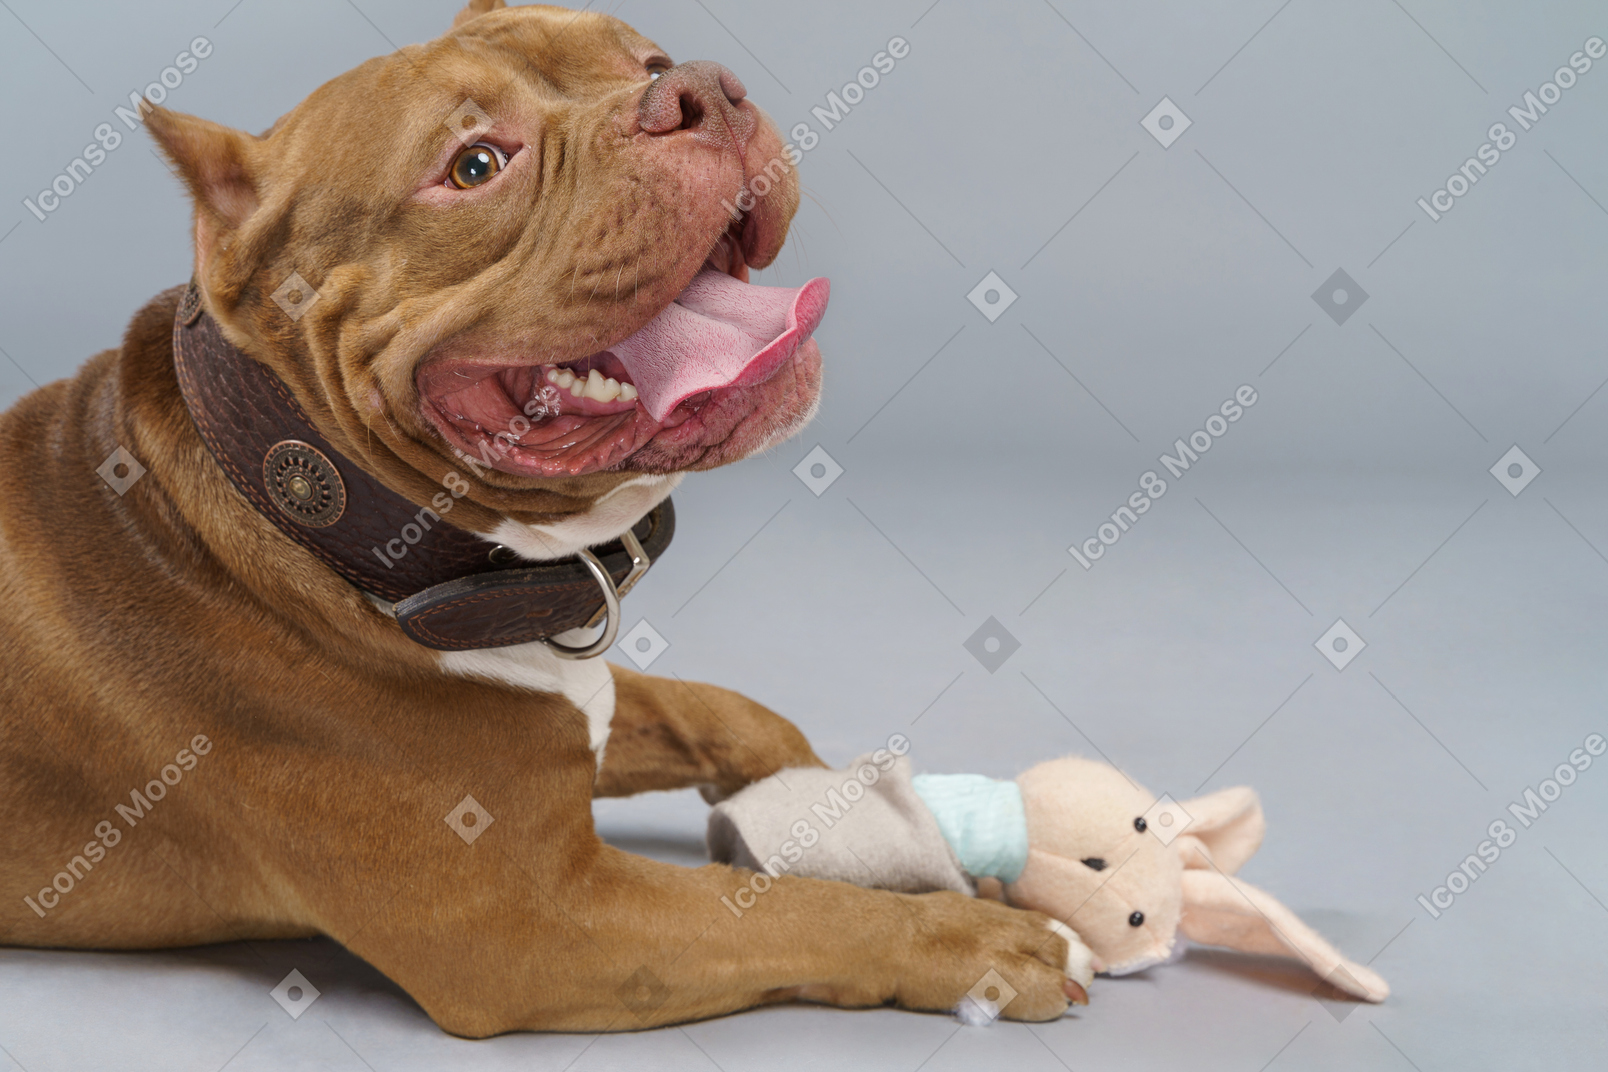 Side view of a brown bulldog with a toy bunny looking at camera